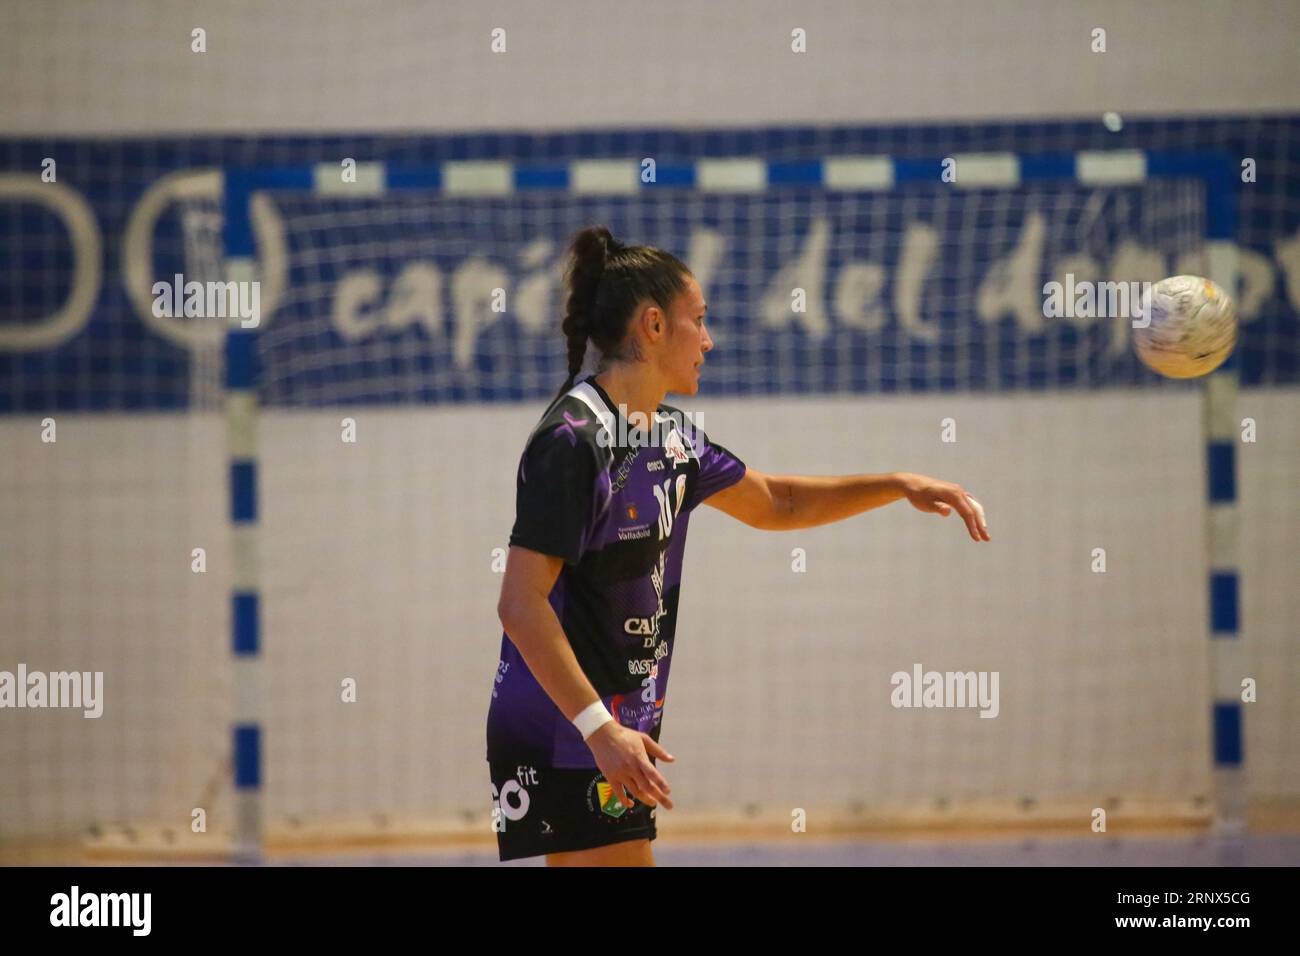 Oviedo, Spain, 02nd September, 2023: The player of Caja Rural Aula Valladolid, Maria Prieto (10) passes the ball during the first day of the Liga Guerreras Iberdrola between Lobas Global Atac Oviedo and Caja Rural Aula Valladolid, on 02 September 2023, at the Florida Arena Municipal Sports Center, in Oviedo, Spain. Credit: Alberto Brevers / Alamy Live News. Stock Photo